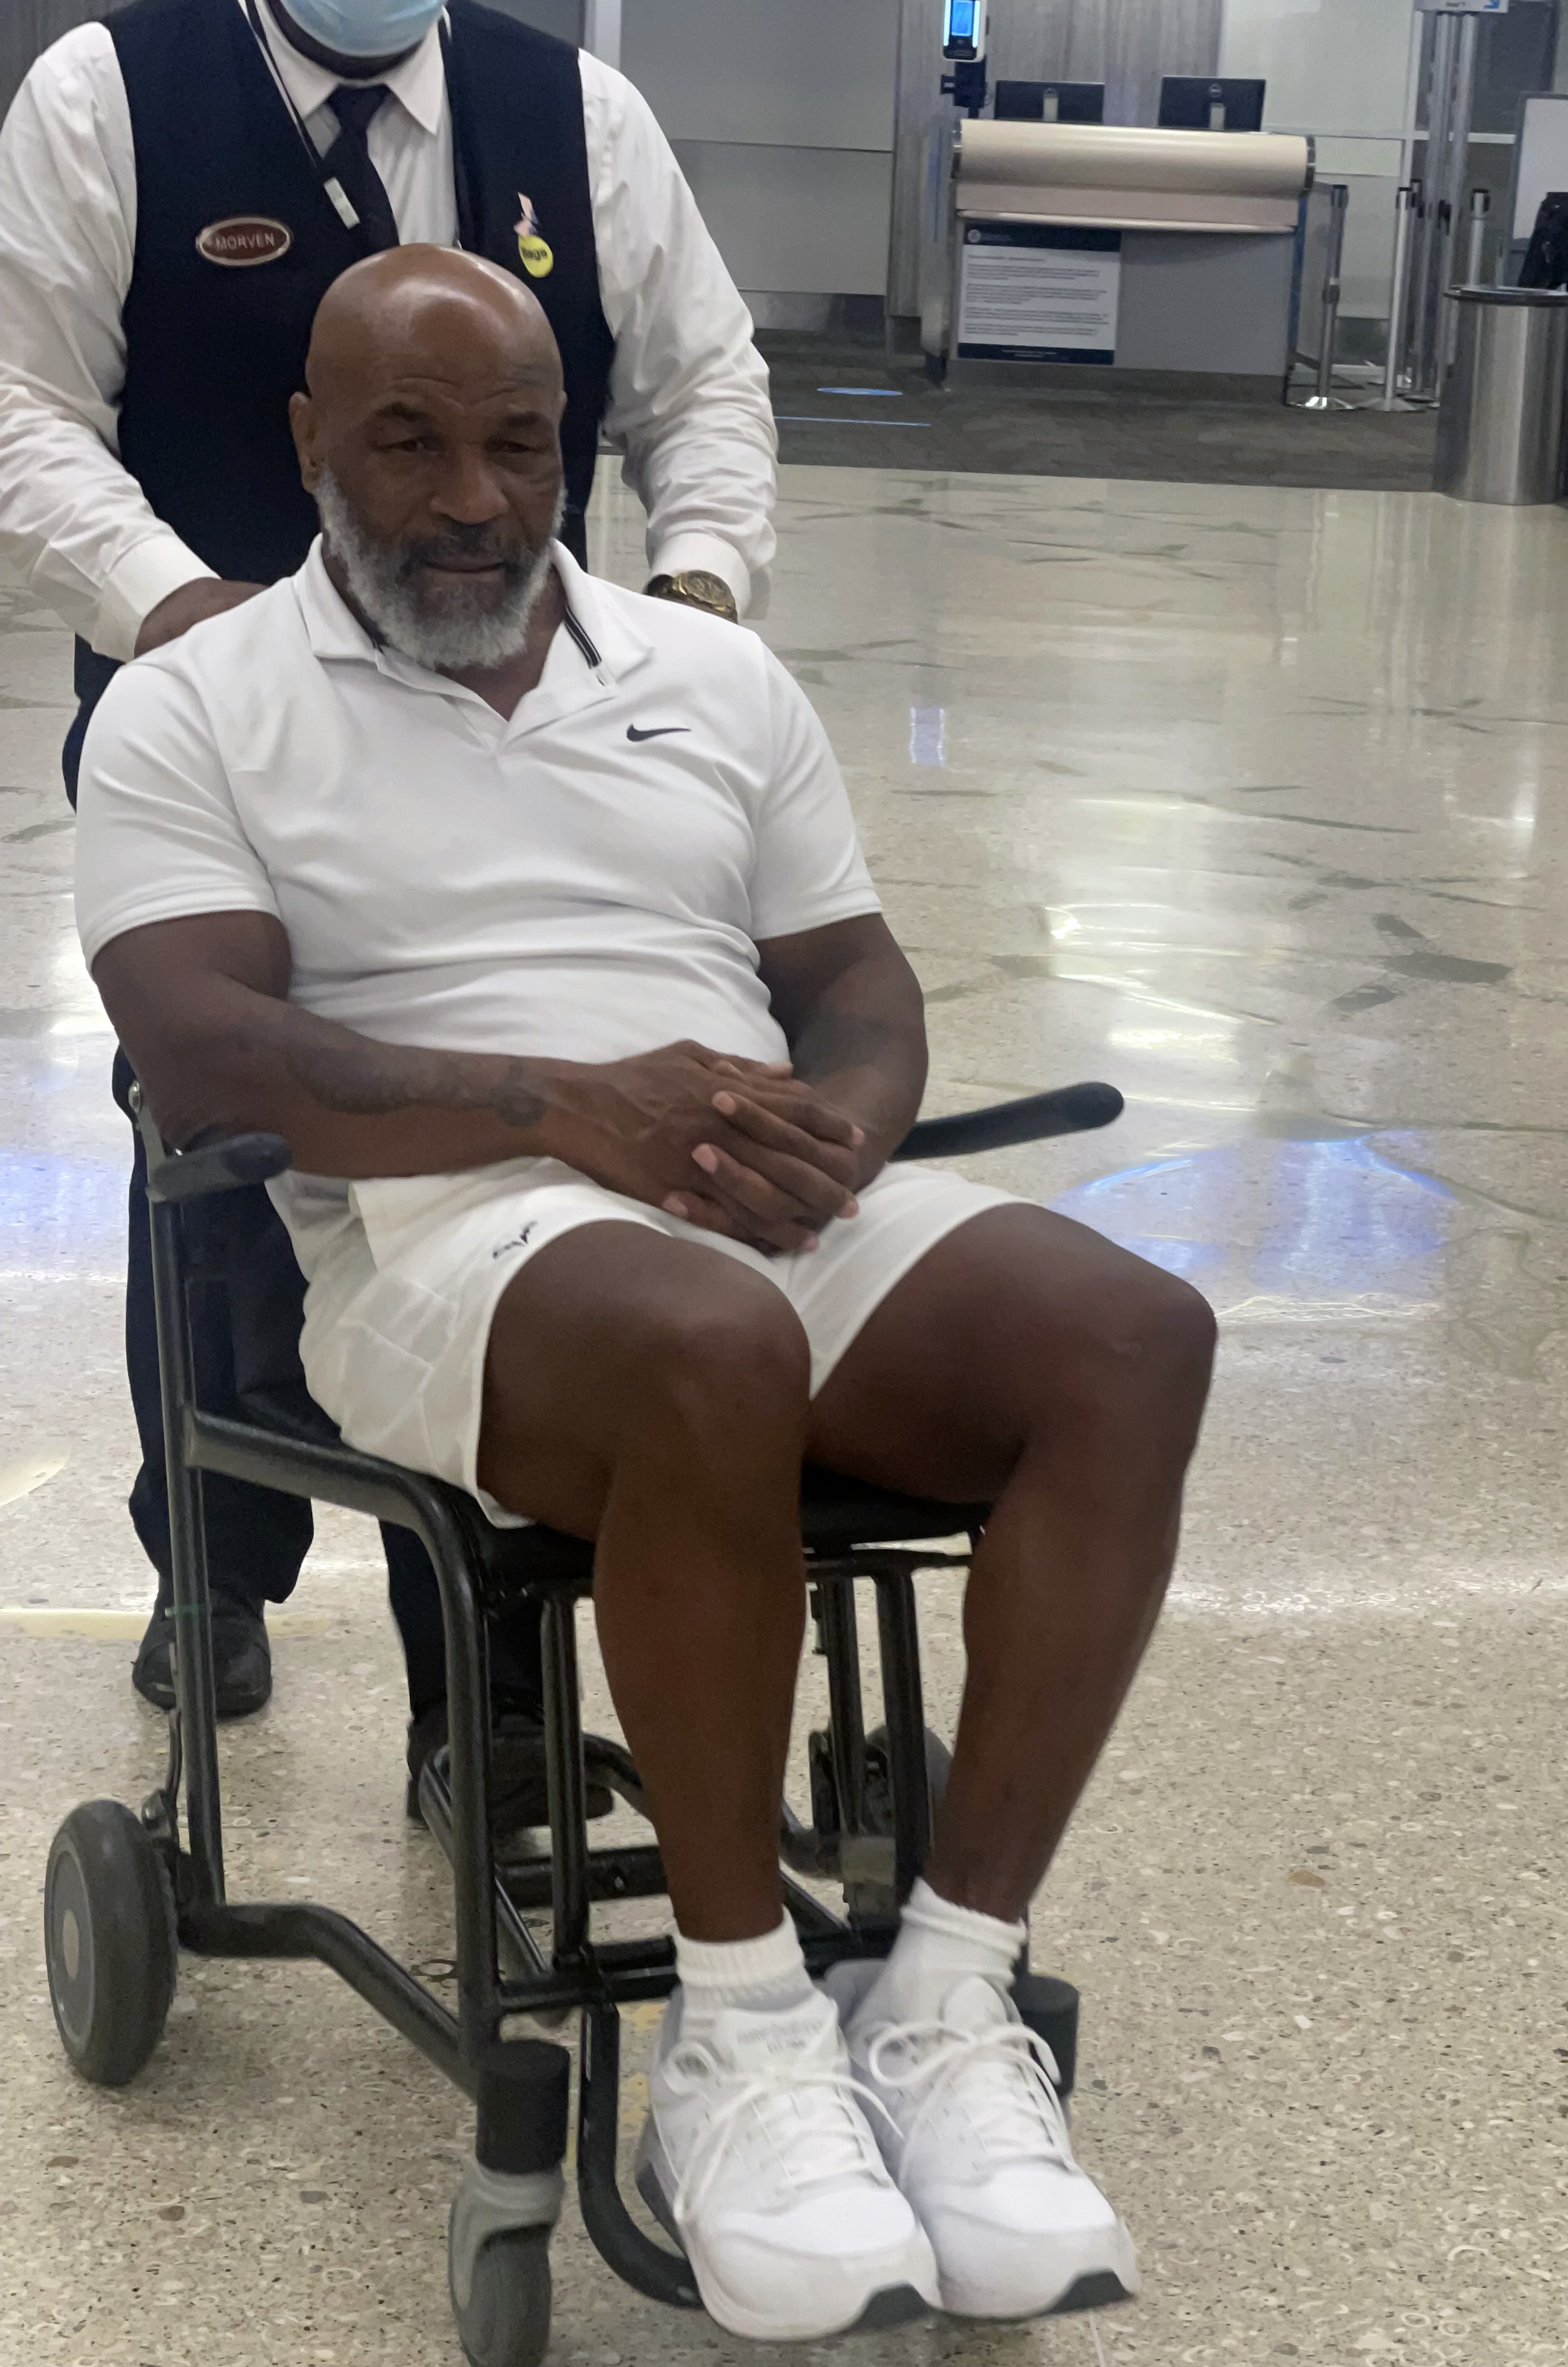 , Mike Tyson, 56, pictured in wheelchair holding walking stick as fearsome boxing legend is pushed through Miami airport